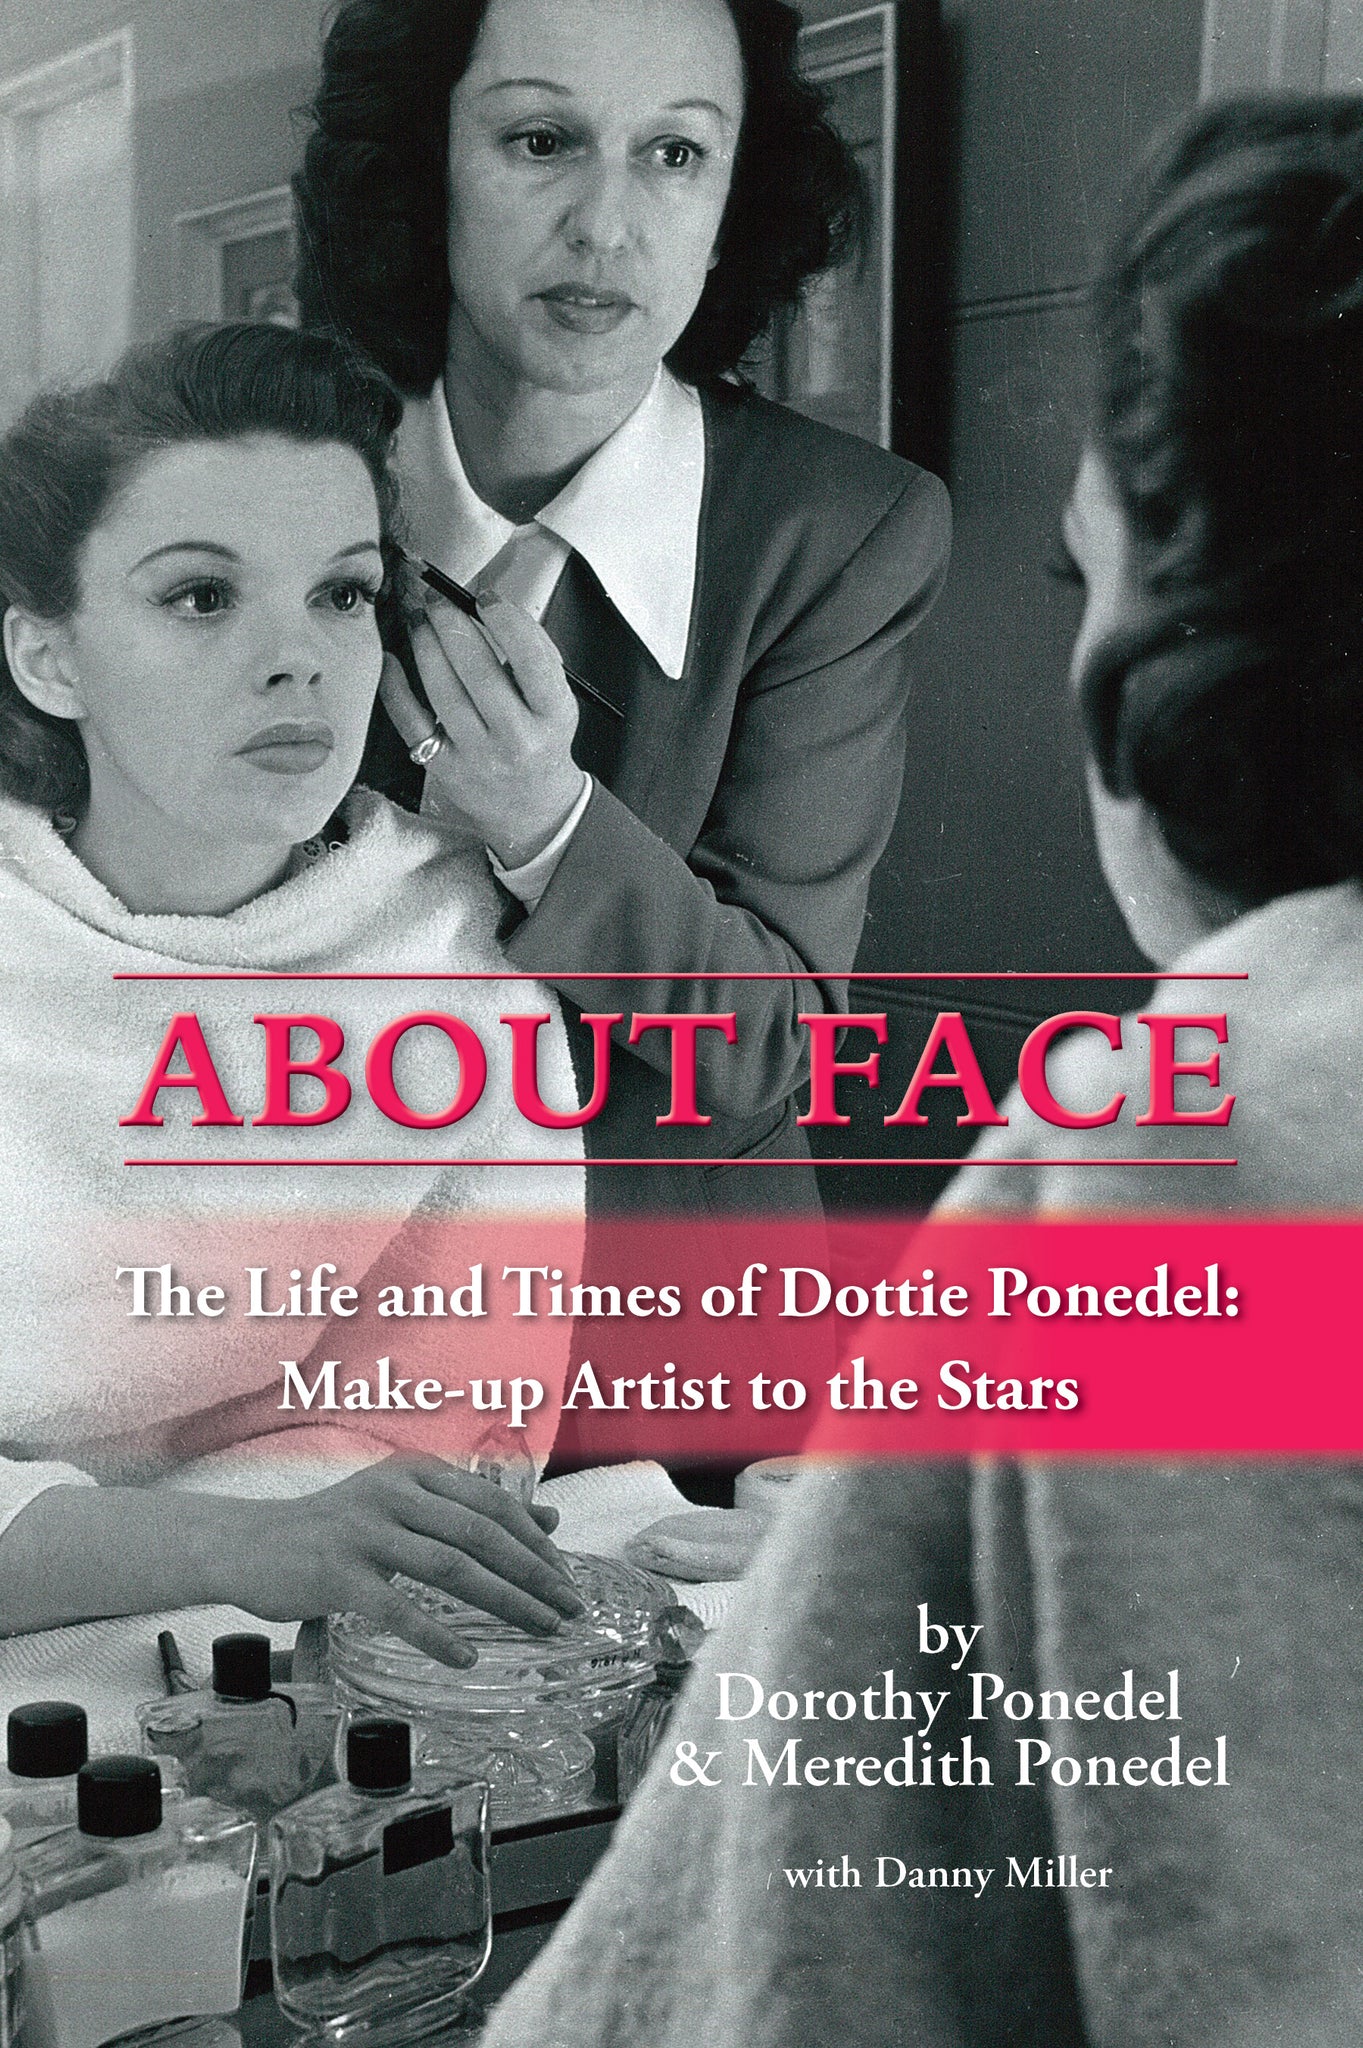 About Face: The Life and Times of Dottie Ponedel, Make-up Artist to the Stars (hardback) - BearManor Manor